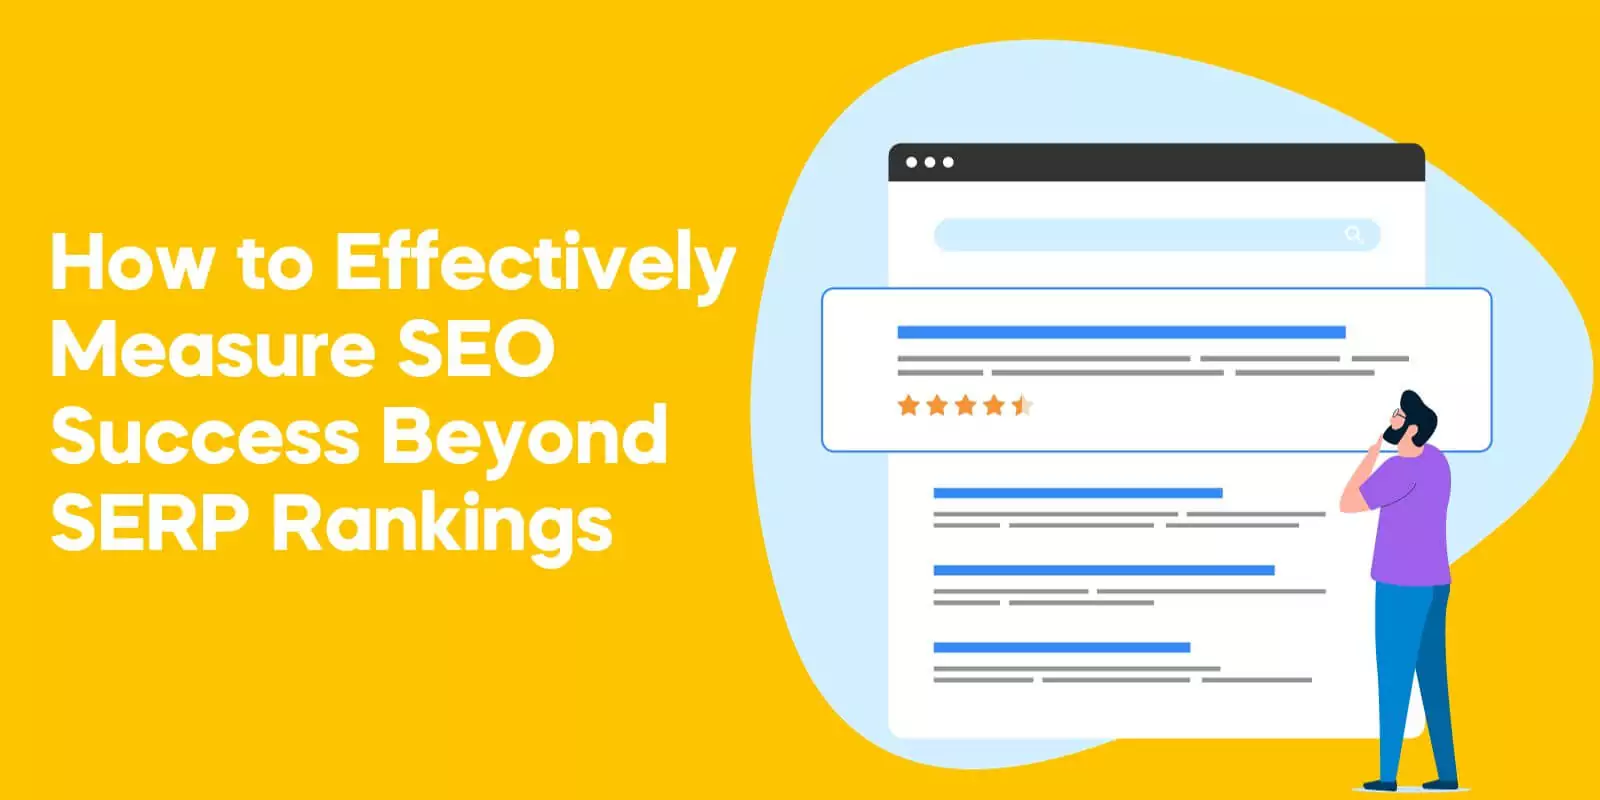 How to Effectively Measure SEO Success Beyond SERP Rankings